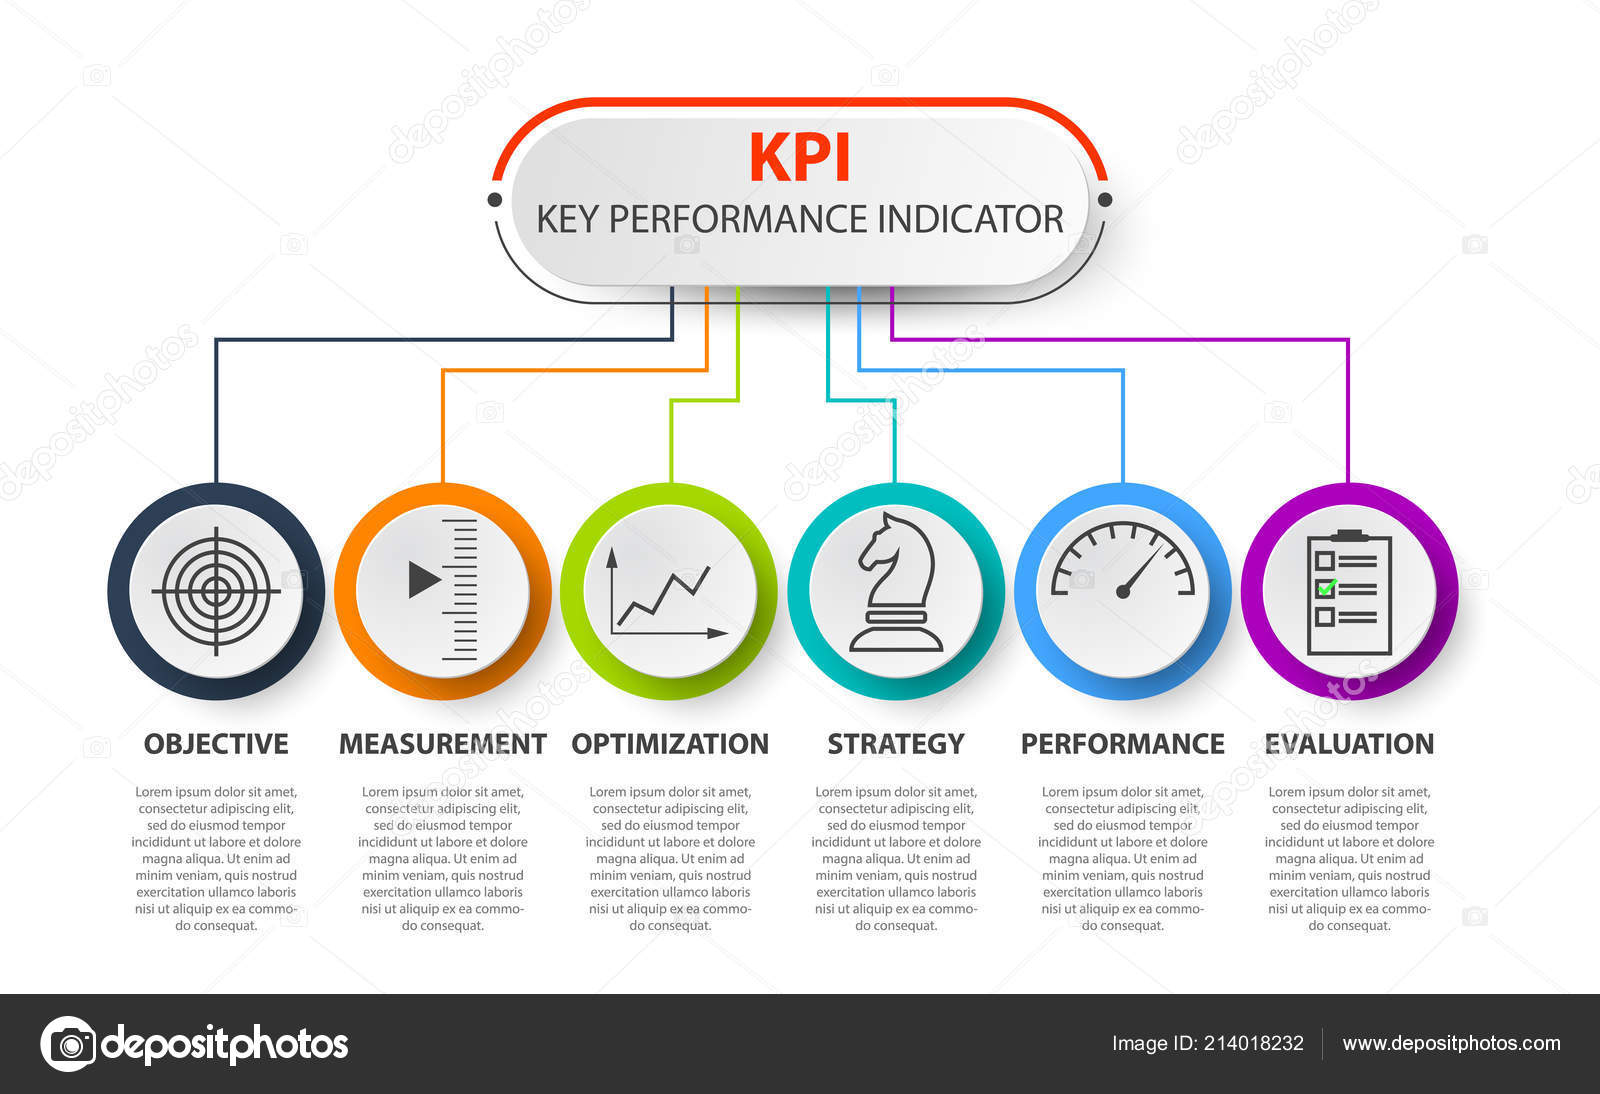 Tipos De Indicadores Kpis Examples - IMAGESEE